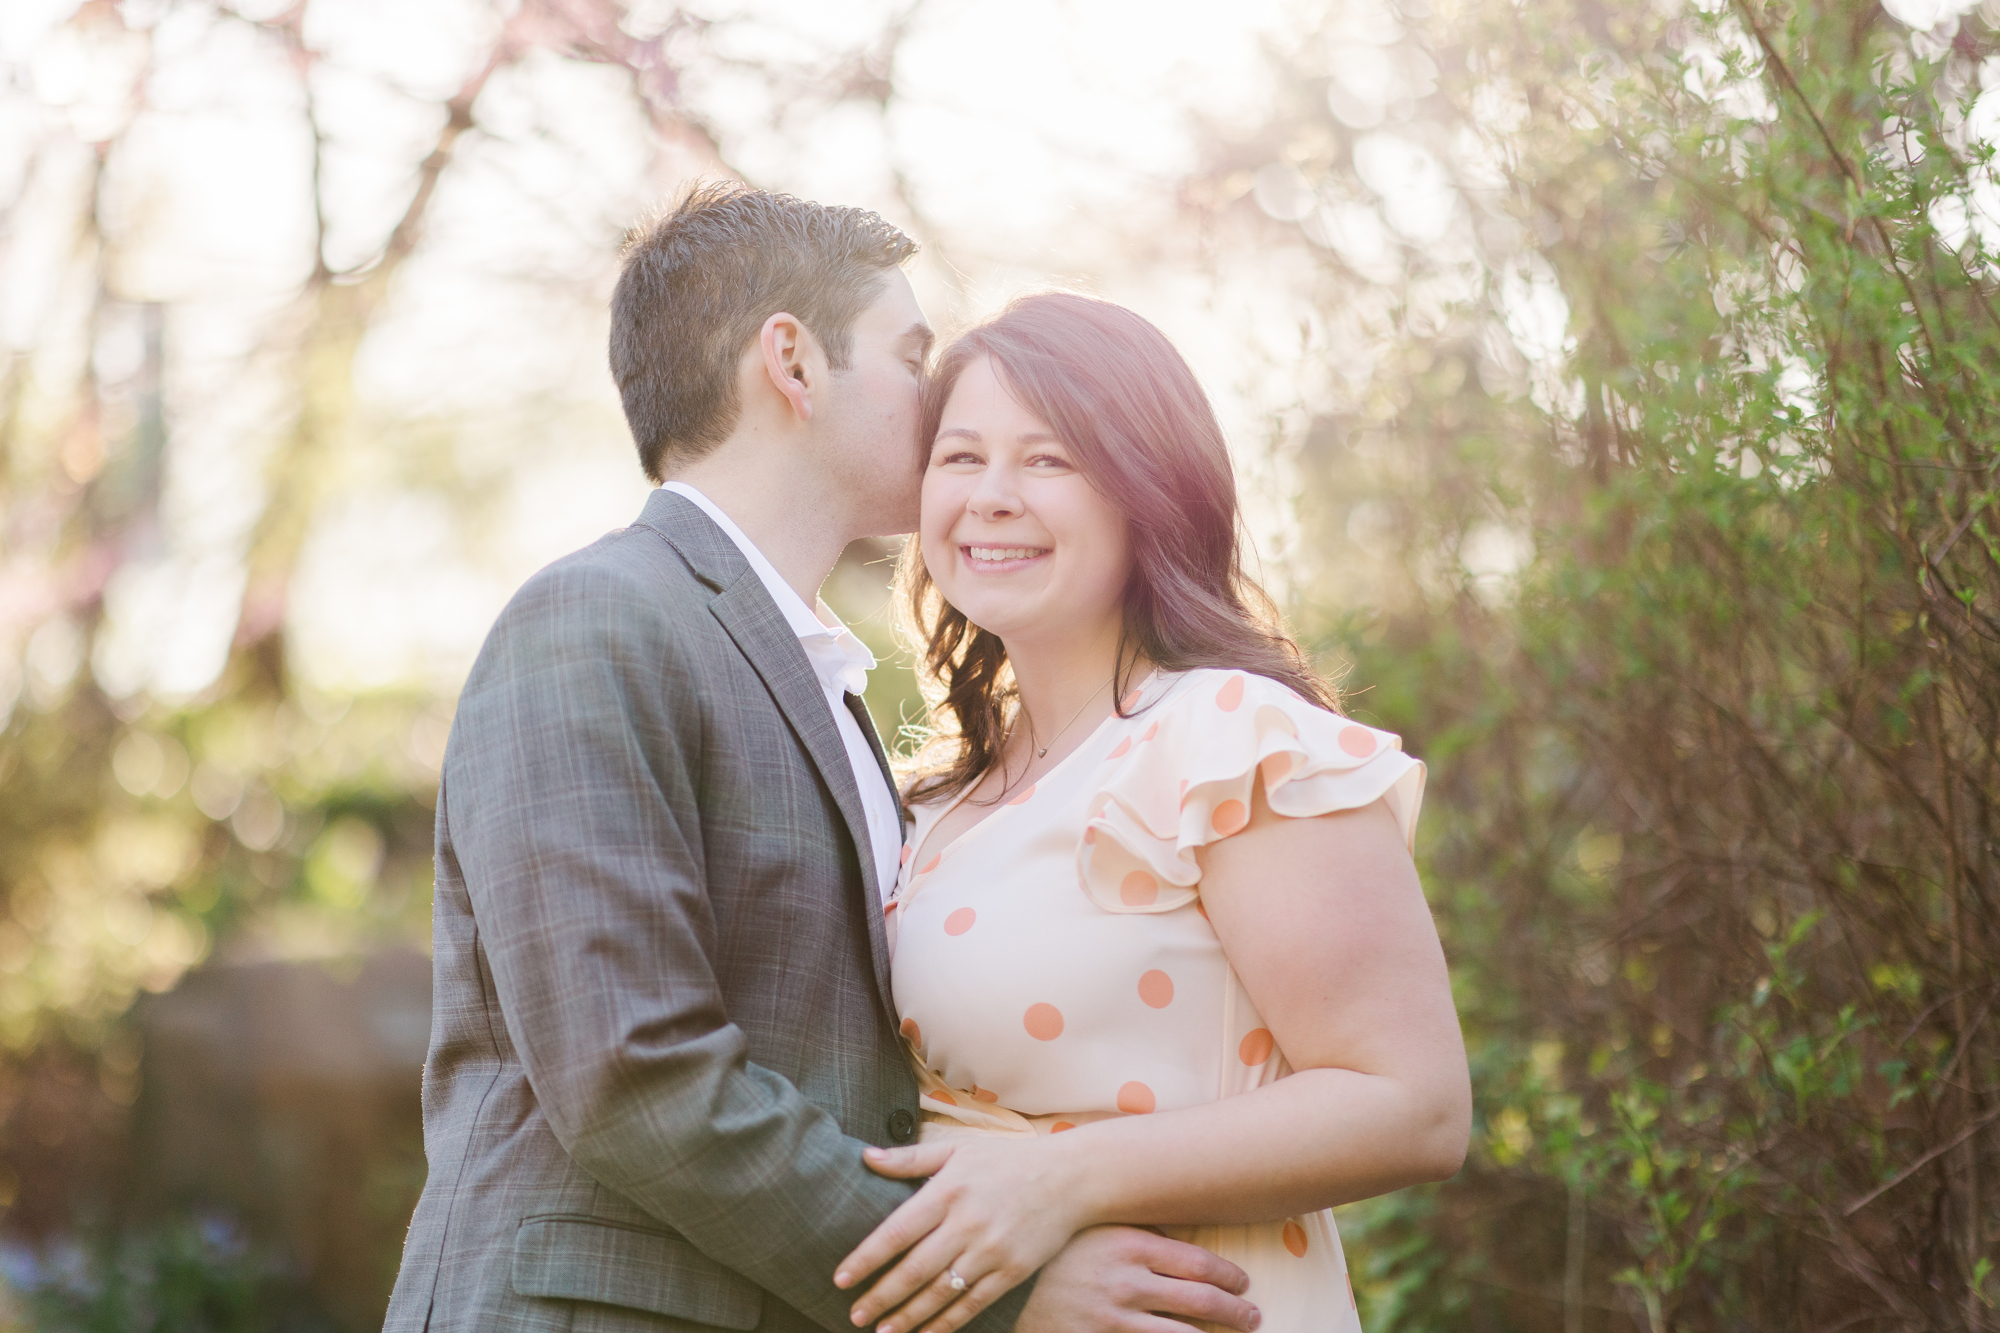 Pretty Spring Engagement Photography in NYC